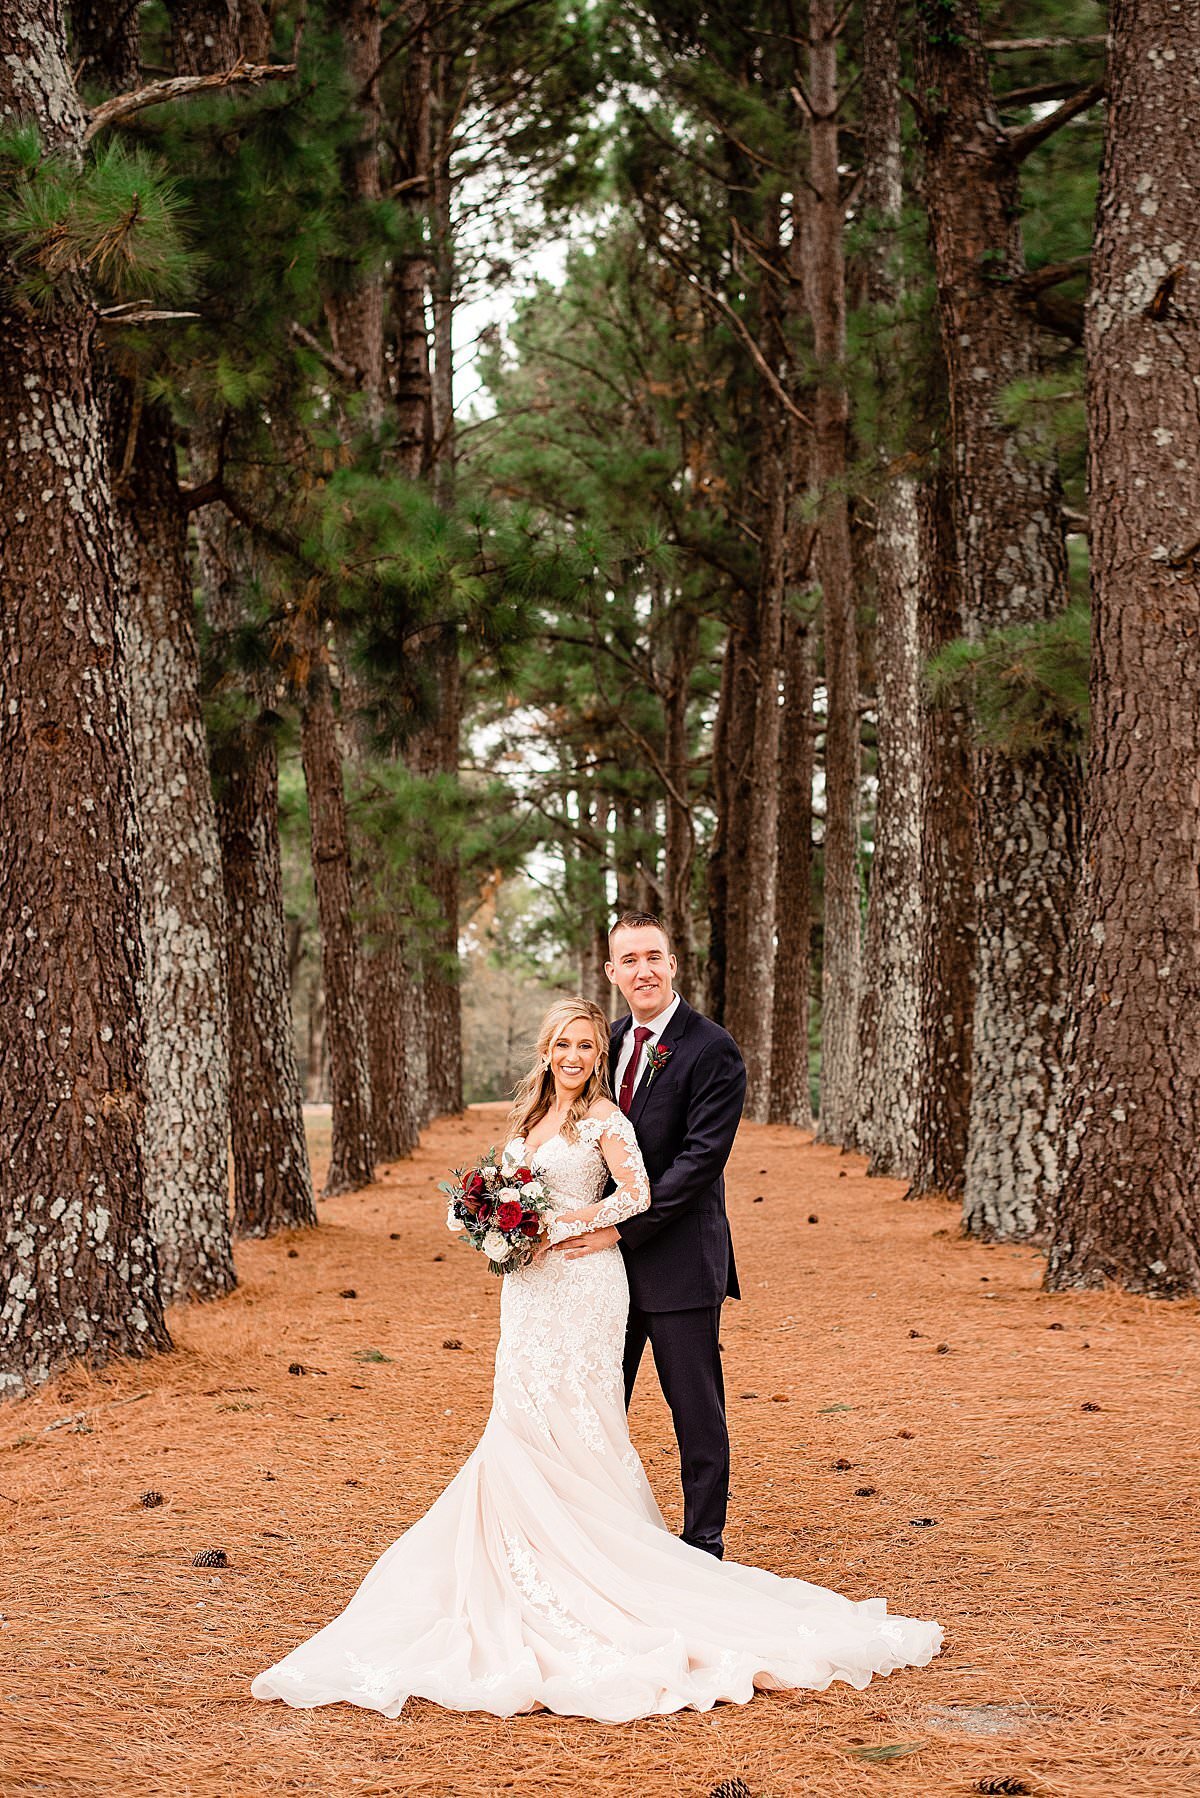 Portrait of Bride and groom standing in evergreen treeline at Rural Hill Farm, pine needles of ground surrounding them